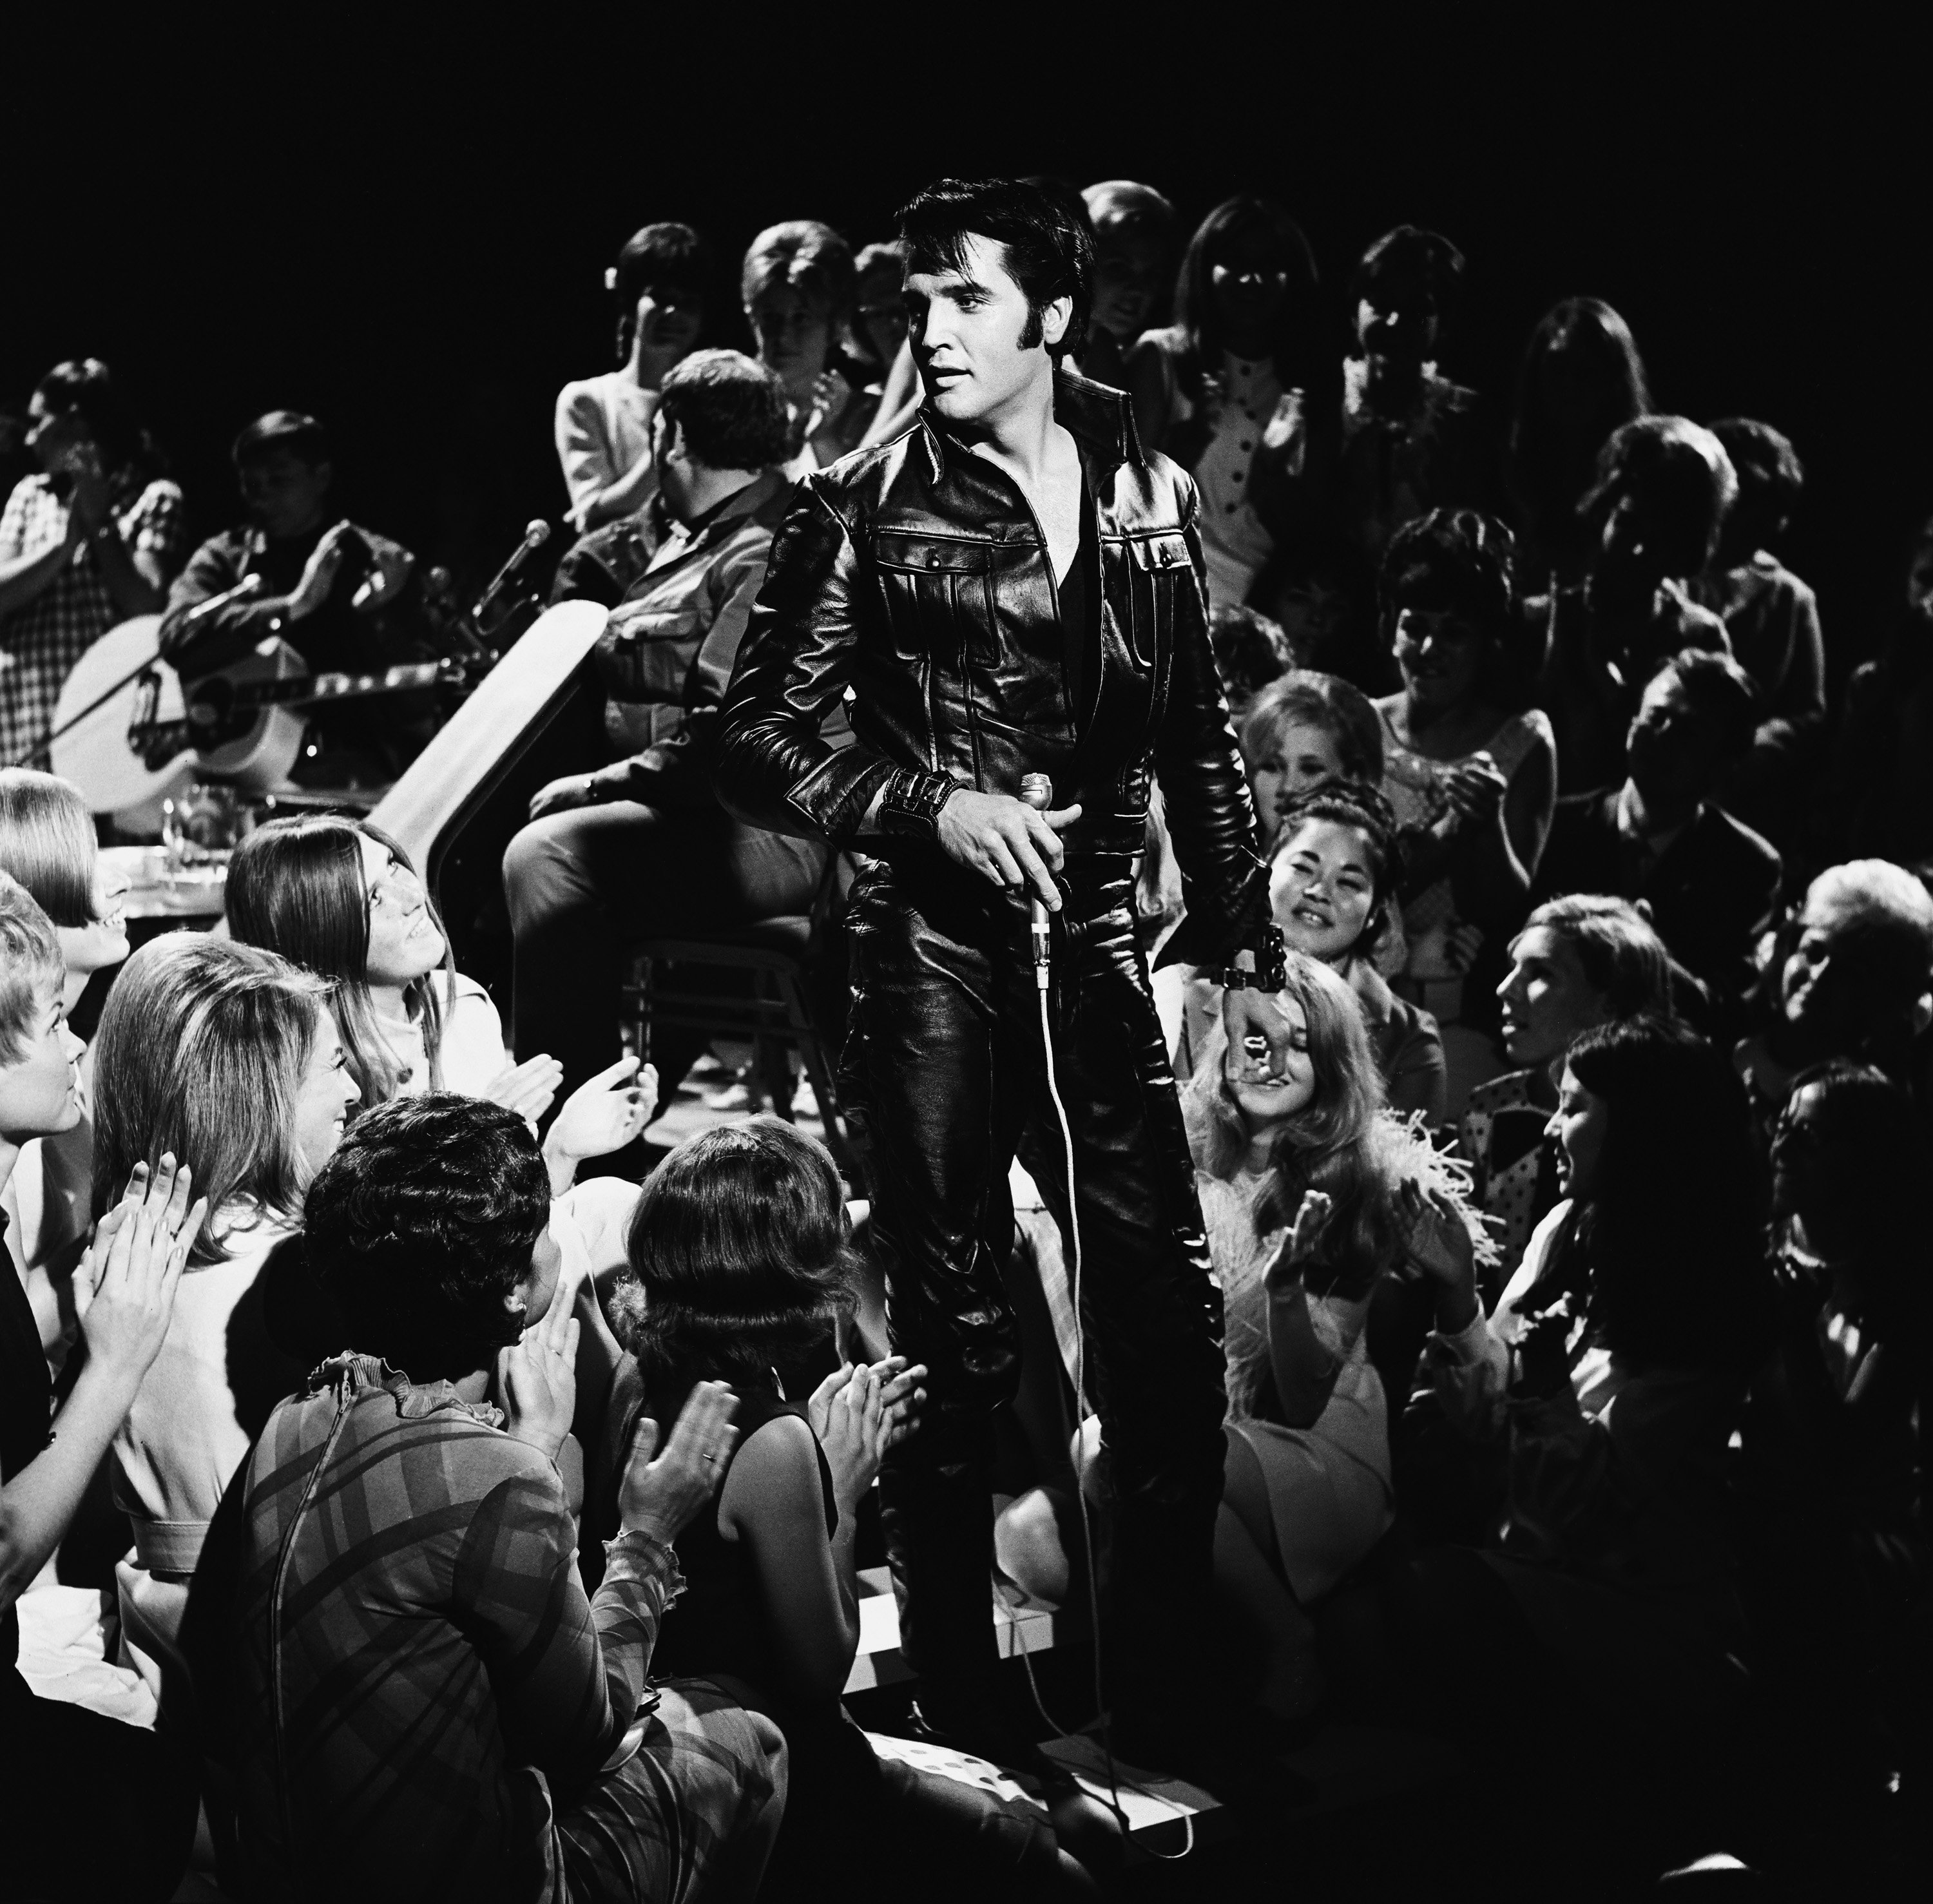 Elvis Presley surrounded by fans during the "If I Can Dream"era